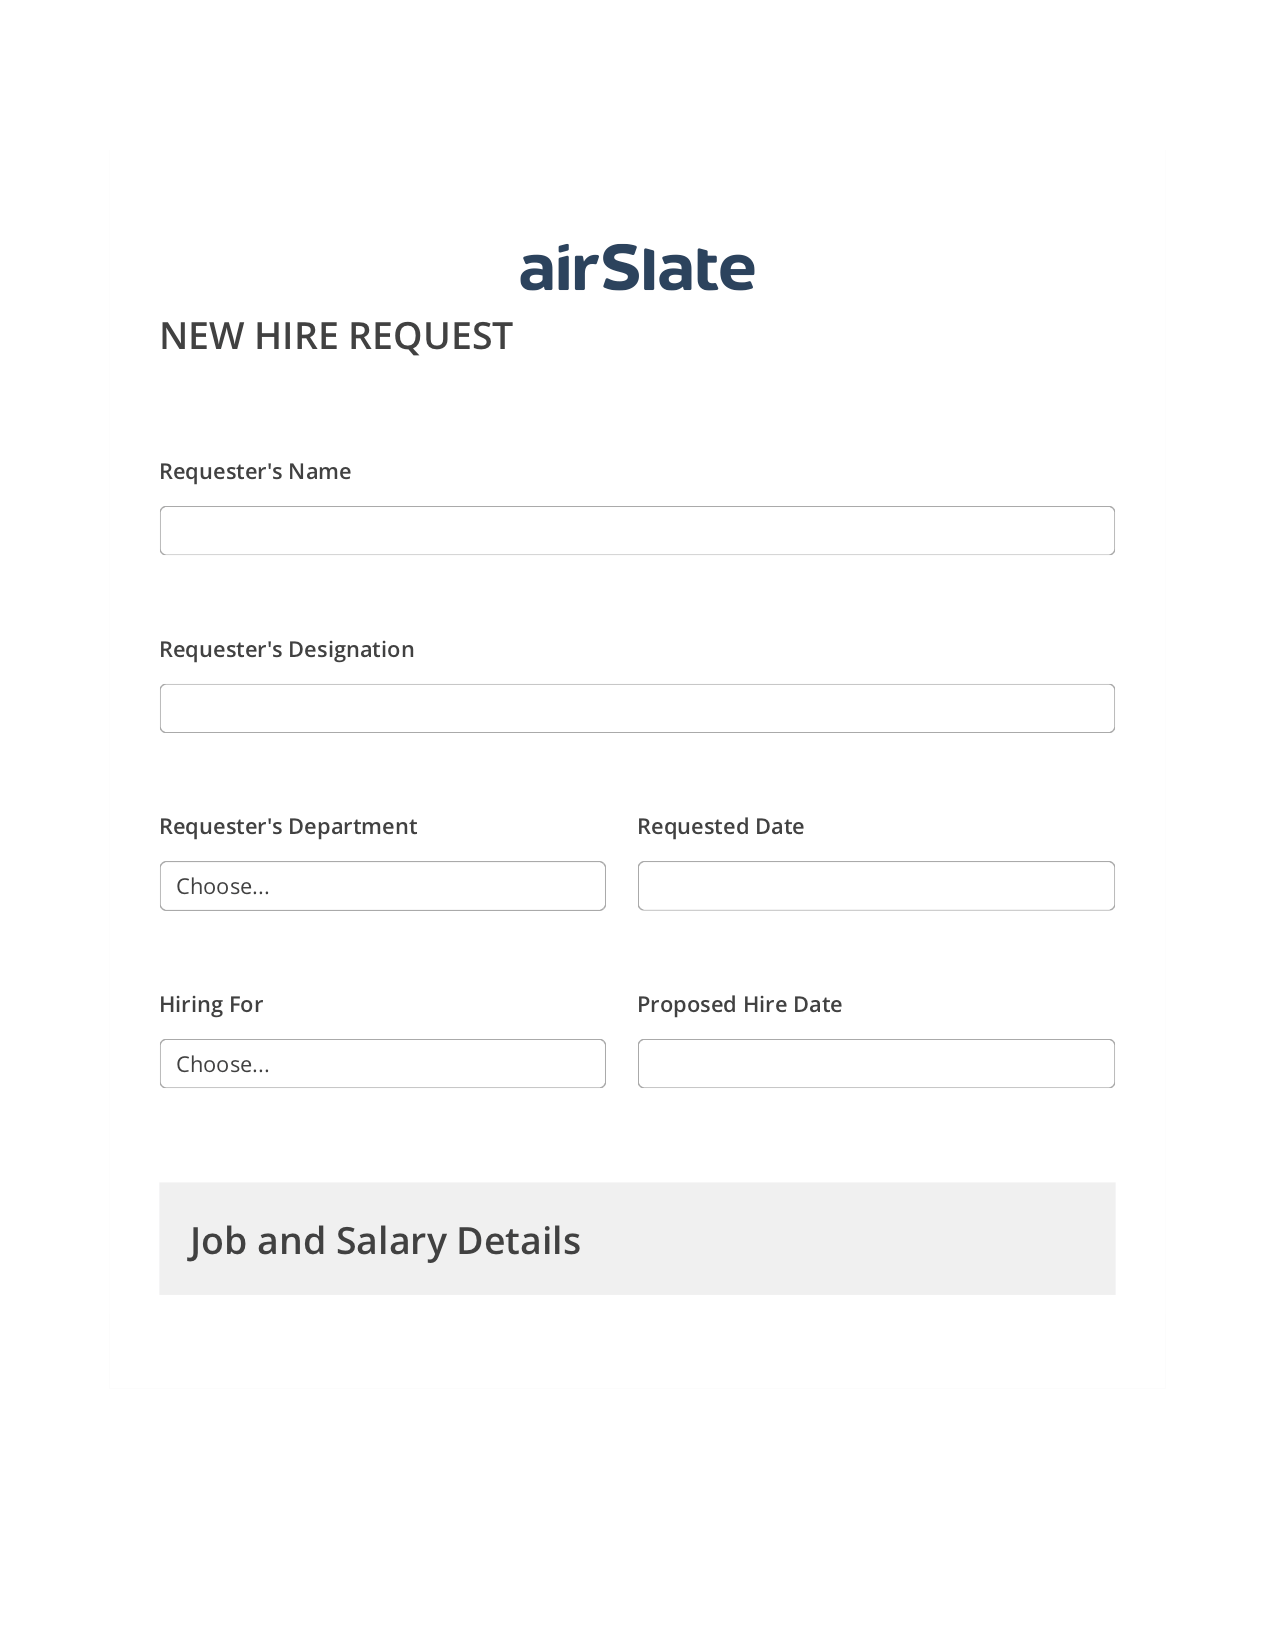 Multirole Hiring Request Workflow Pre-fill from MS Dynamics 365 Records, Text Message Notification Bot, Archive to SharePoint Folder Bot